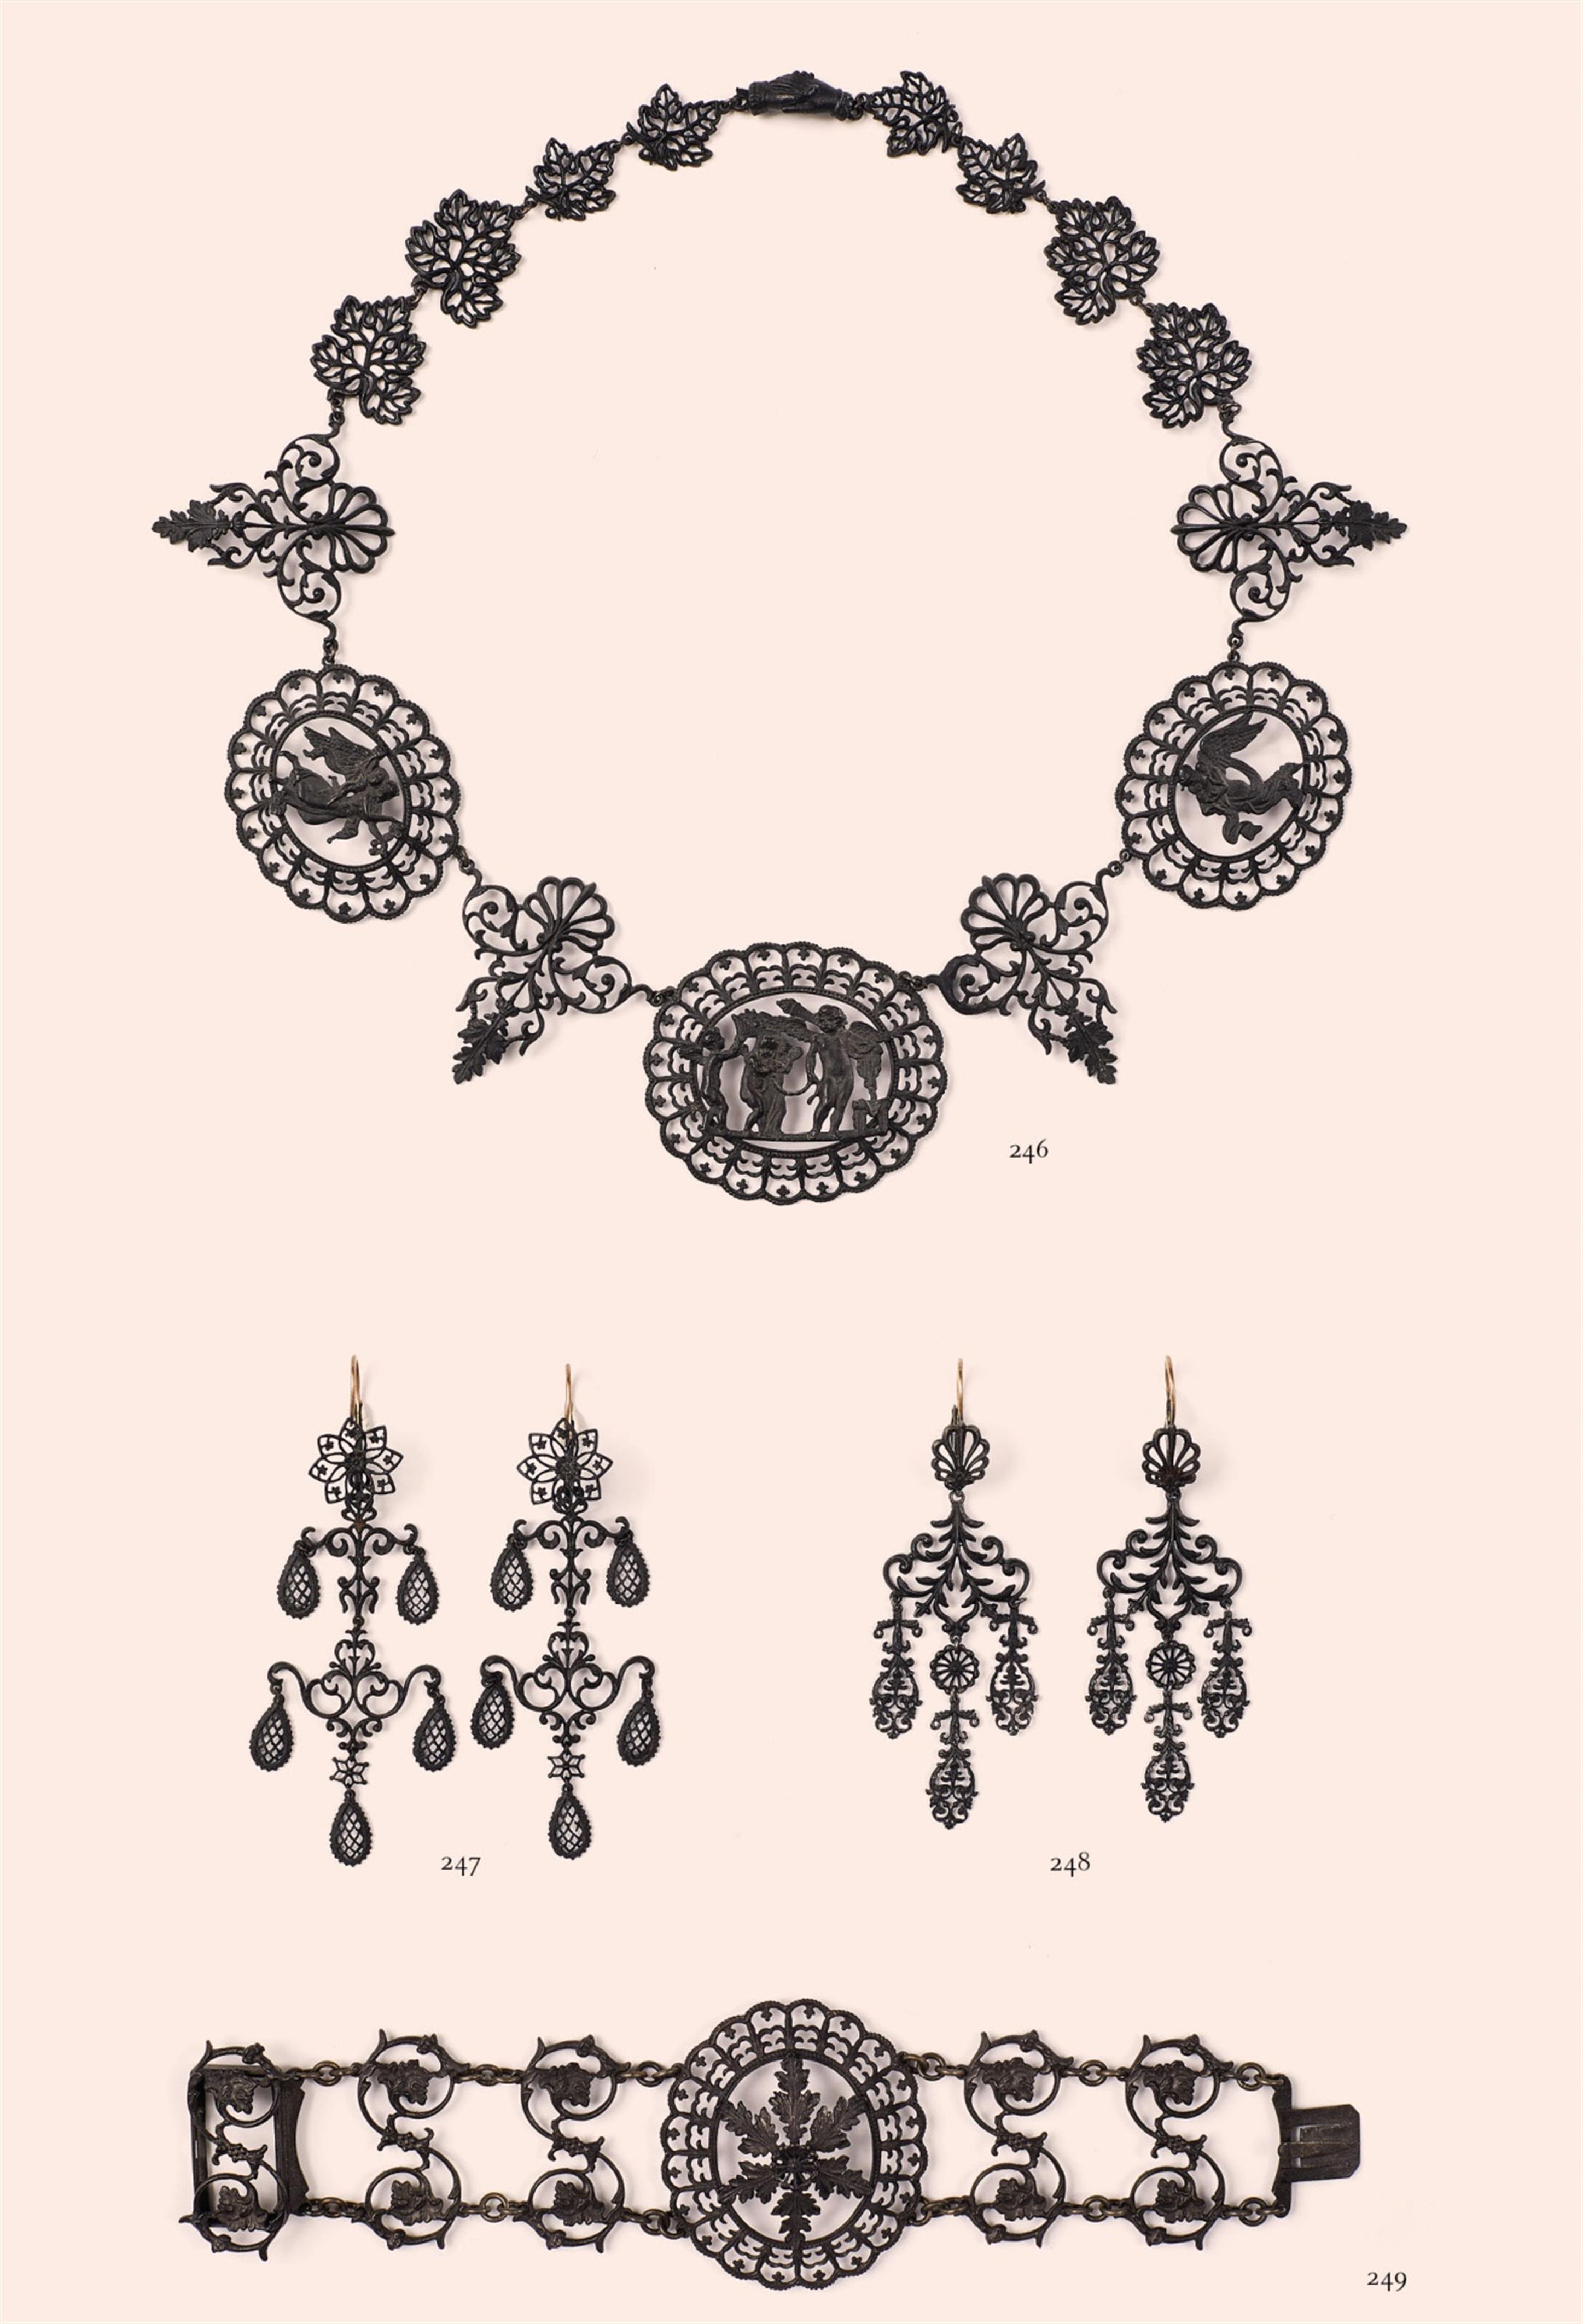 A cast iron necklace with Neoclassical motifs - 